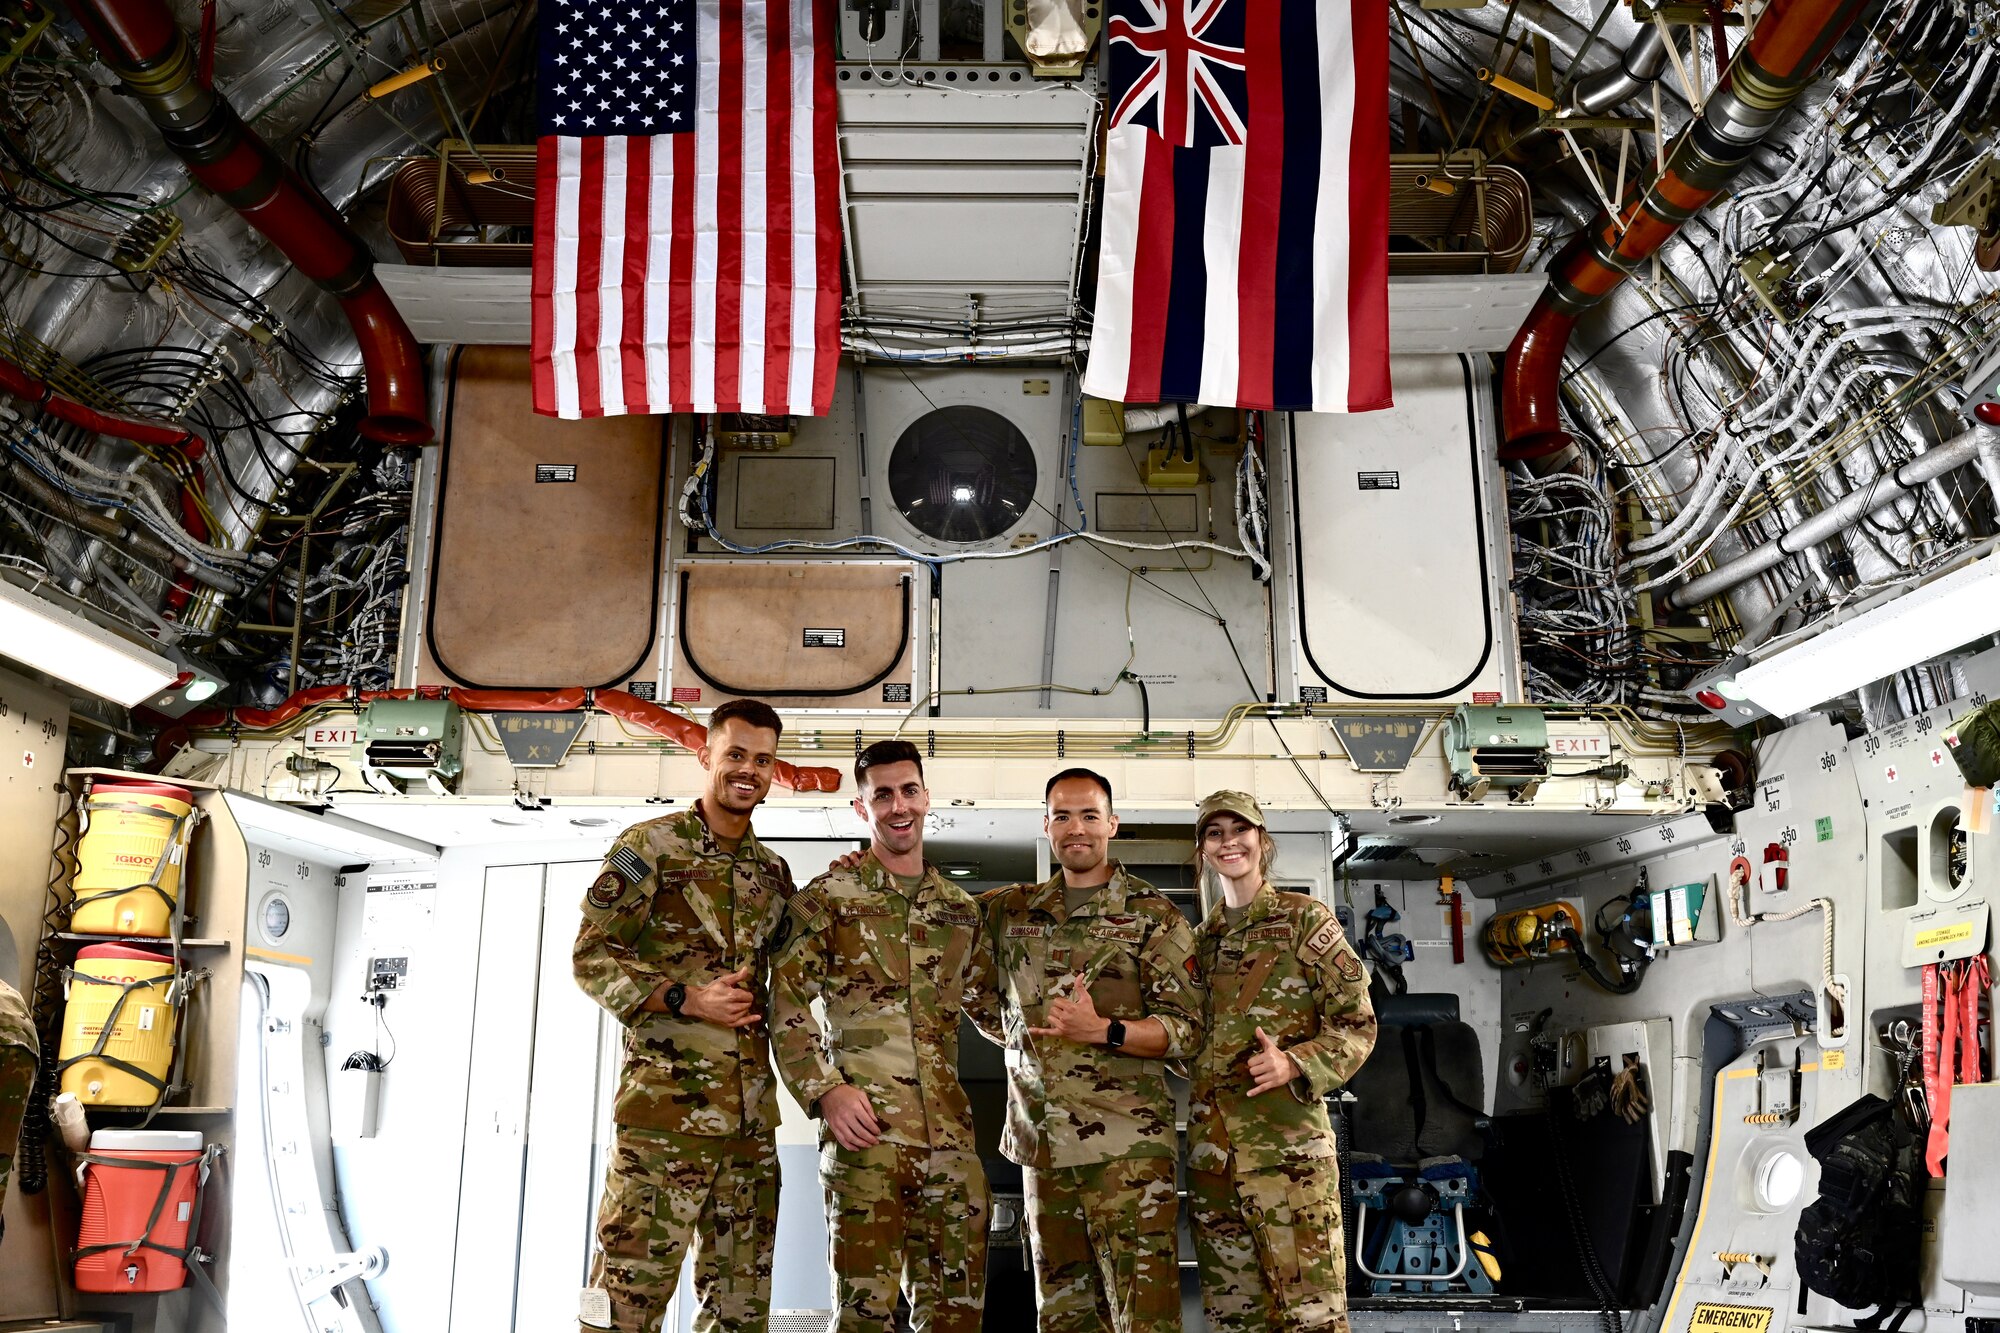 A U.S. Air Force Total Force C-17 Globemaster III, assigned to Joint Base Pearl Harbor-Hickam, Hawaii, pose for a photo inside a C-17 Globemaster III at Indianapolis International Airport, Indiana, May 22, 2022. U.S. Transportation Command expeditiously coordinated across federal agencies, including the Departments of Agriculture and Health and Human Services and the Food and Drug Administration, to support U.S. President Joe Biden’s direction to conduct Operation Fly Formula. (U.S. Air Force photo by 1st Lt. Emma Quirk)